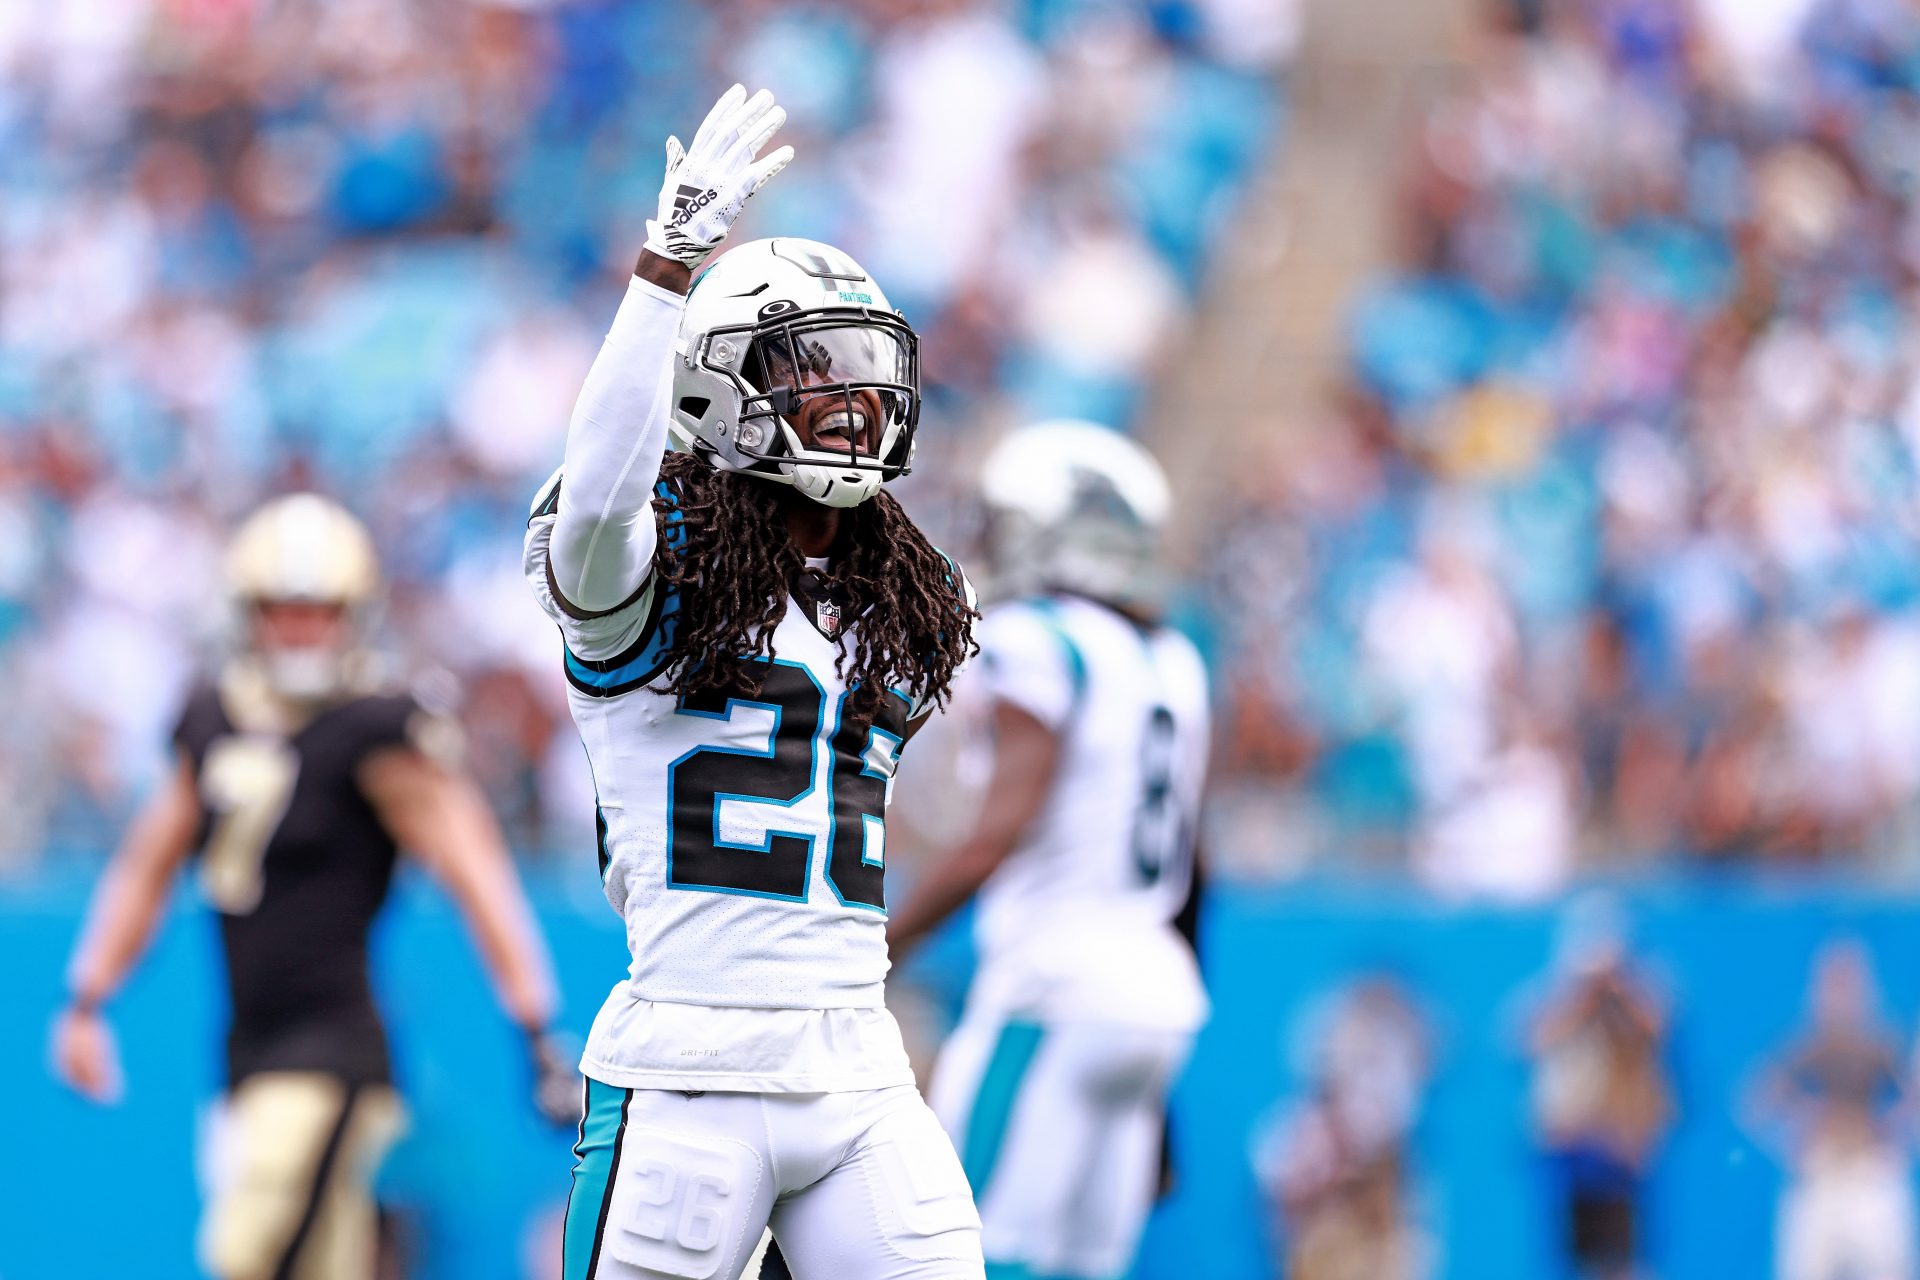 Donte Jackson to the Bills